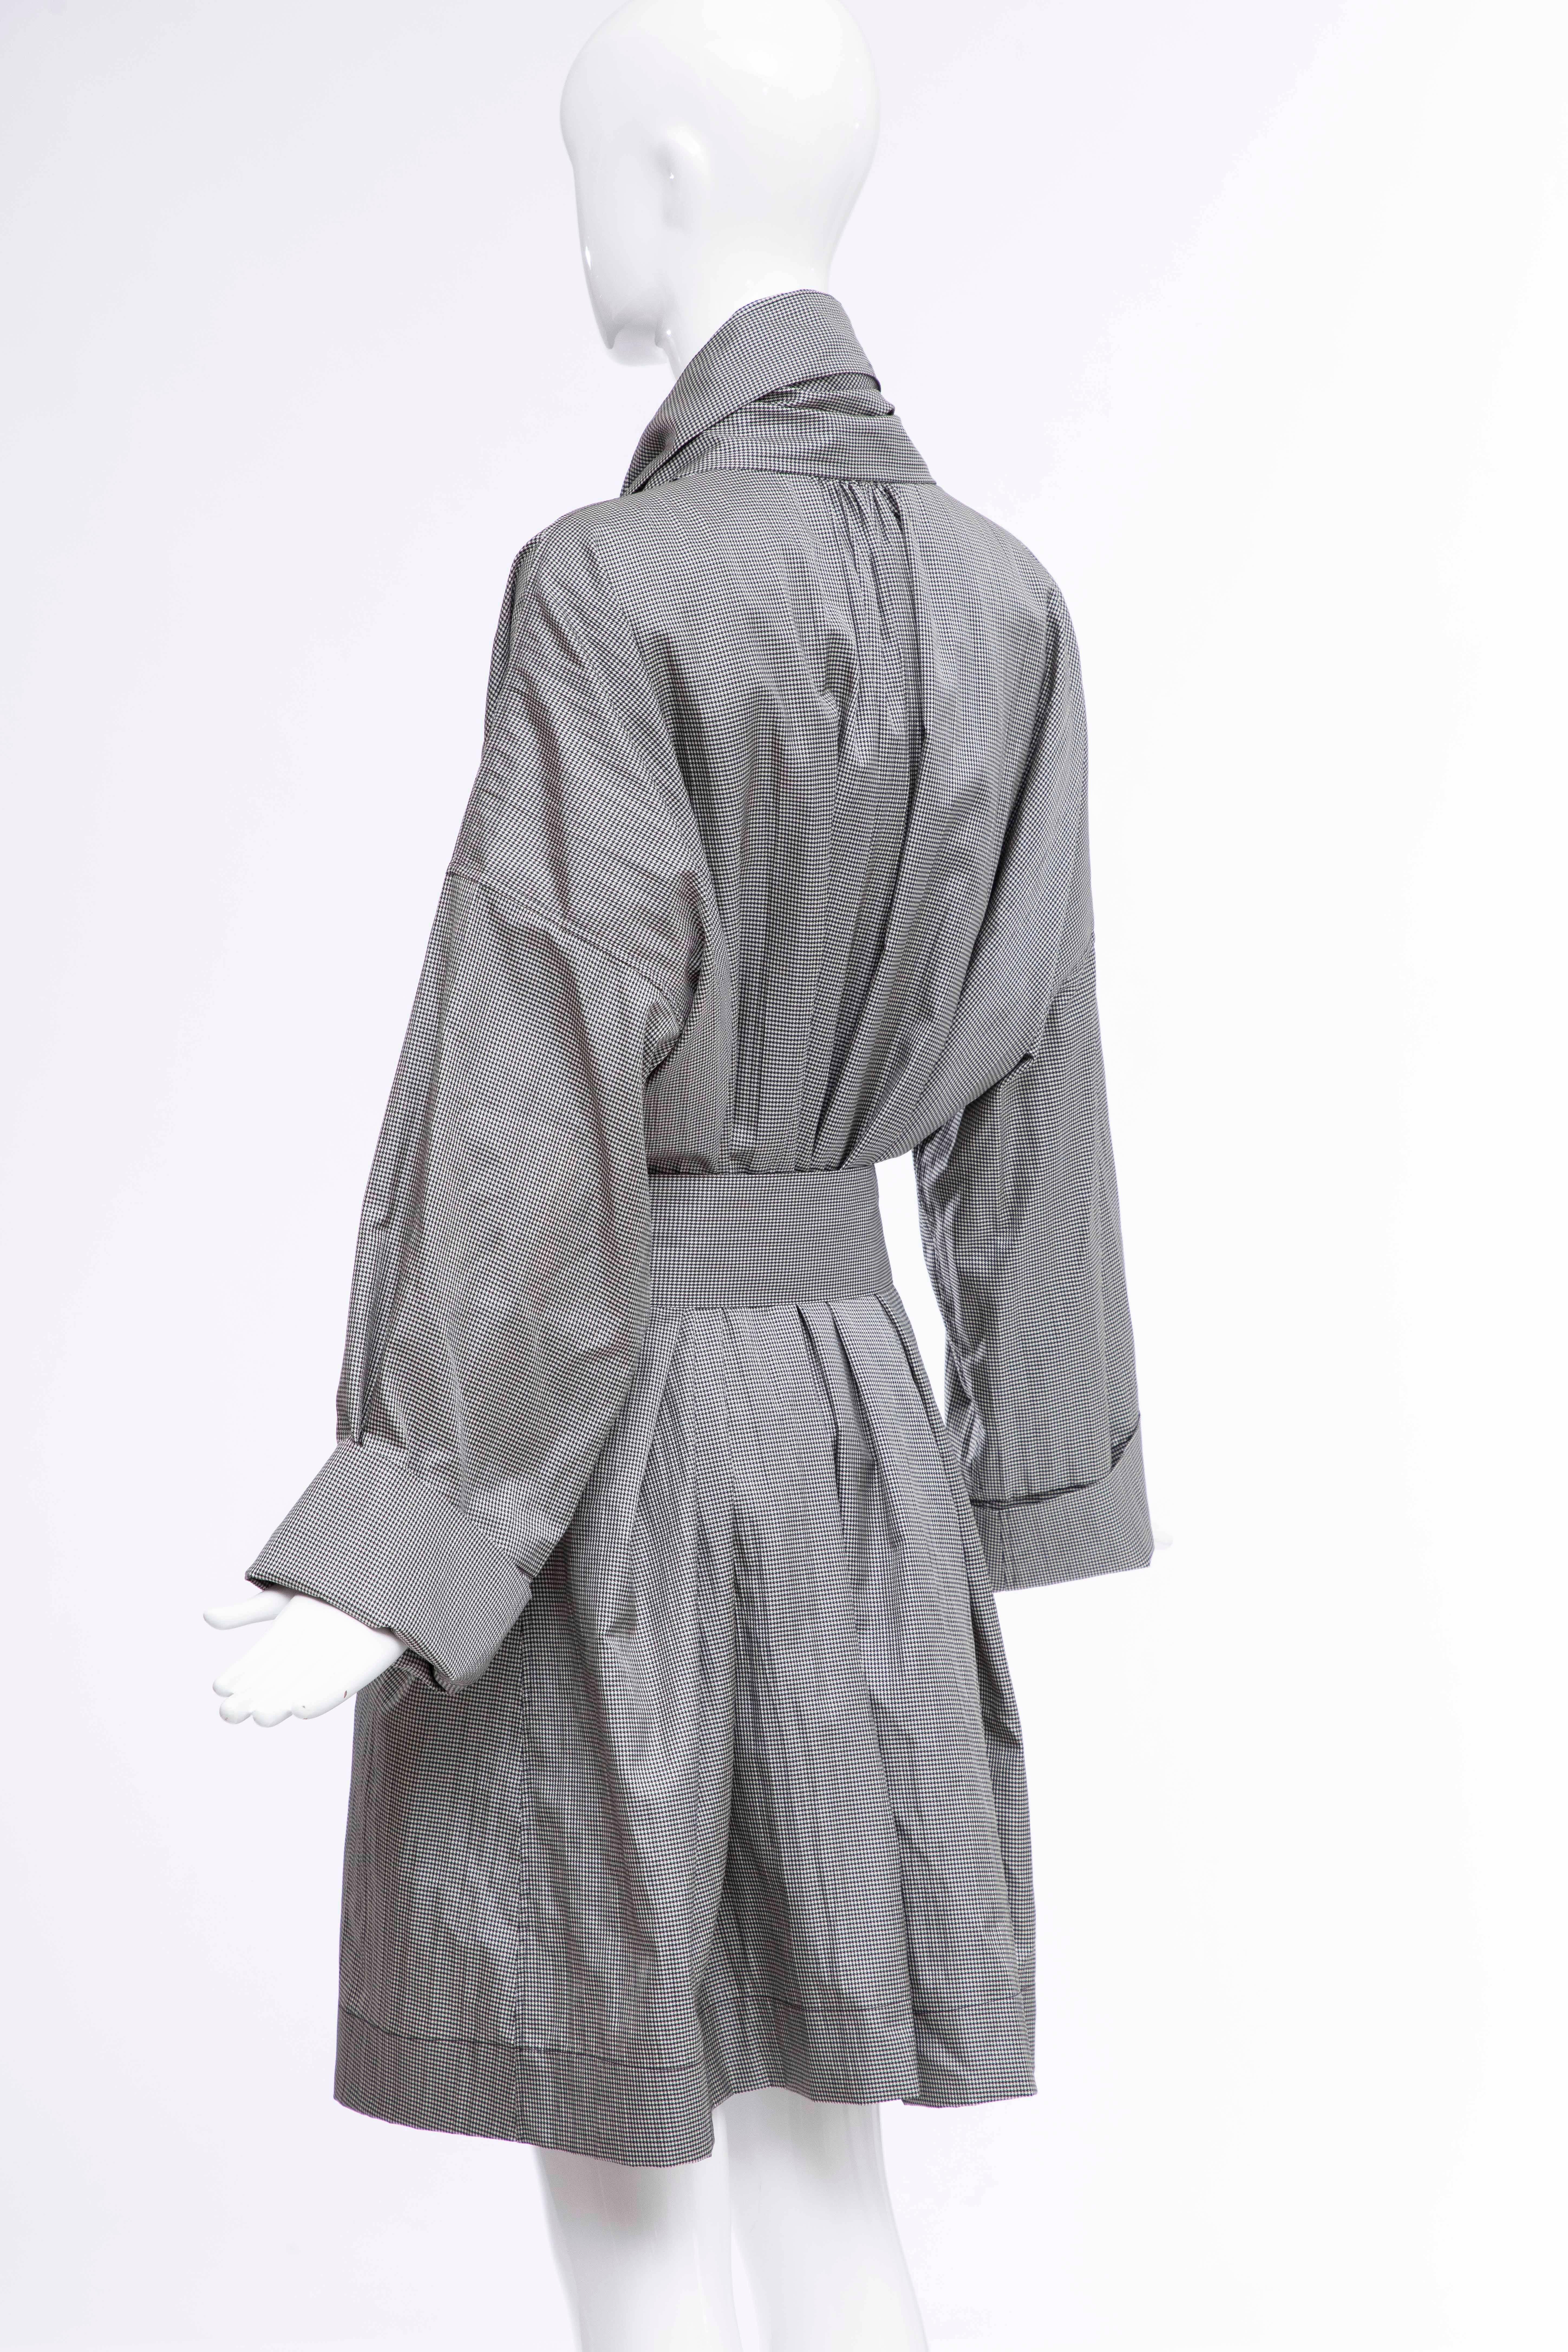 Issey Miyake Houndstooth Trench Coat Metropolitan of Art Collection, Circa 1985 For Sale 1